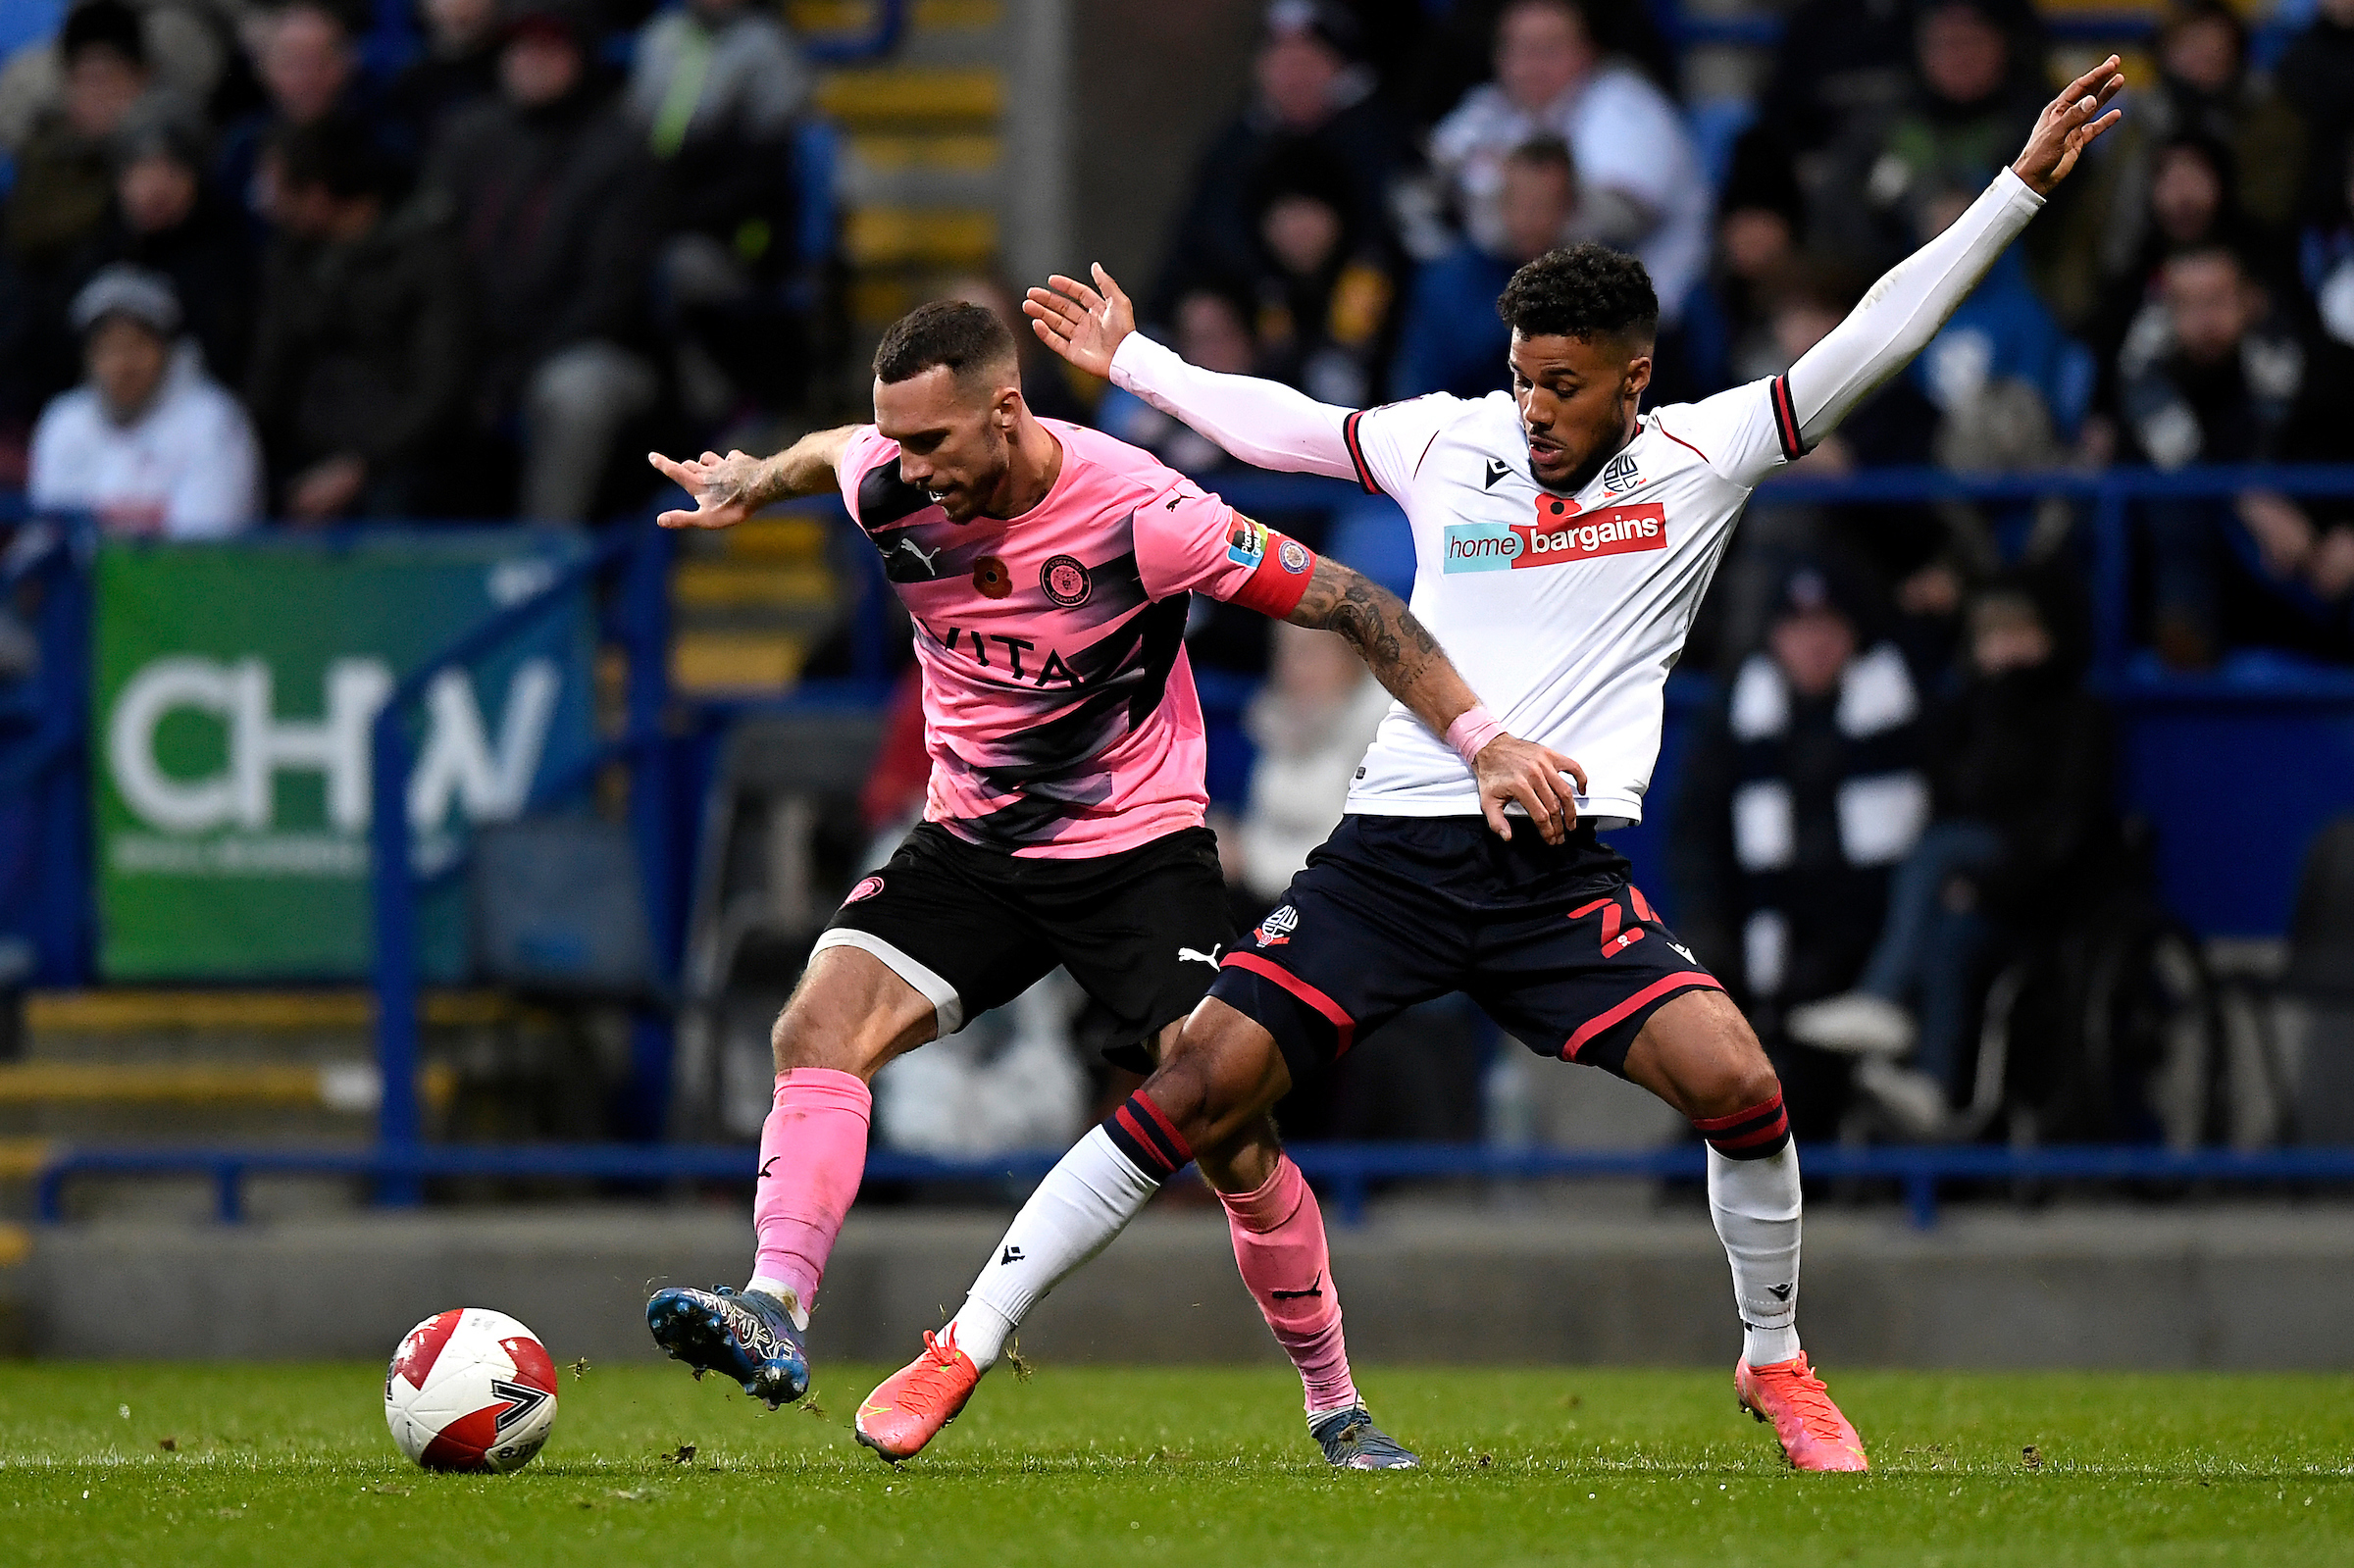 Bolton Wanderers 2 Stockport County 2 - recap and highlights from the UniBol